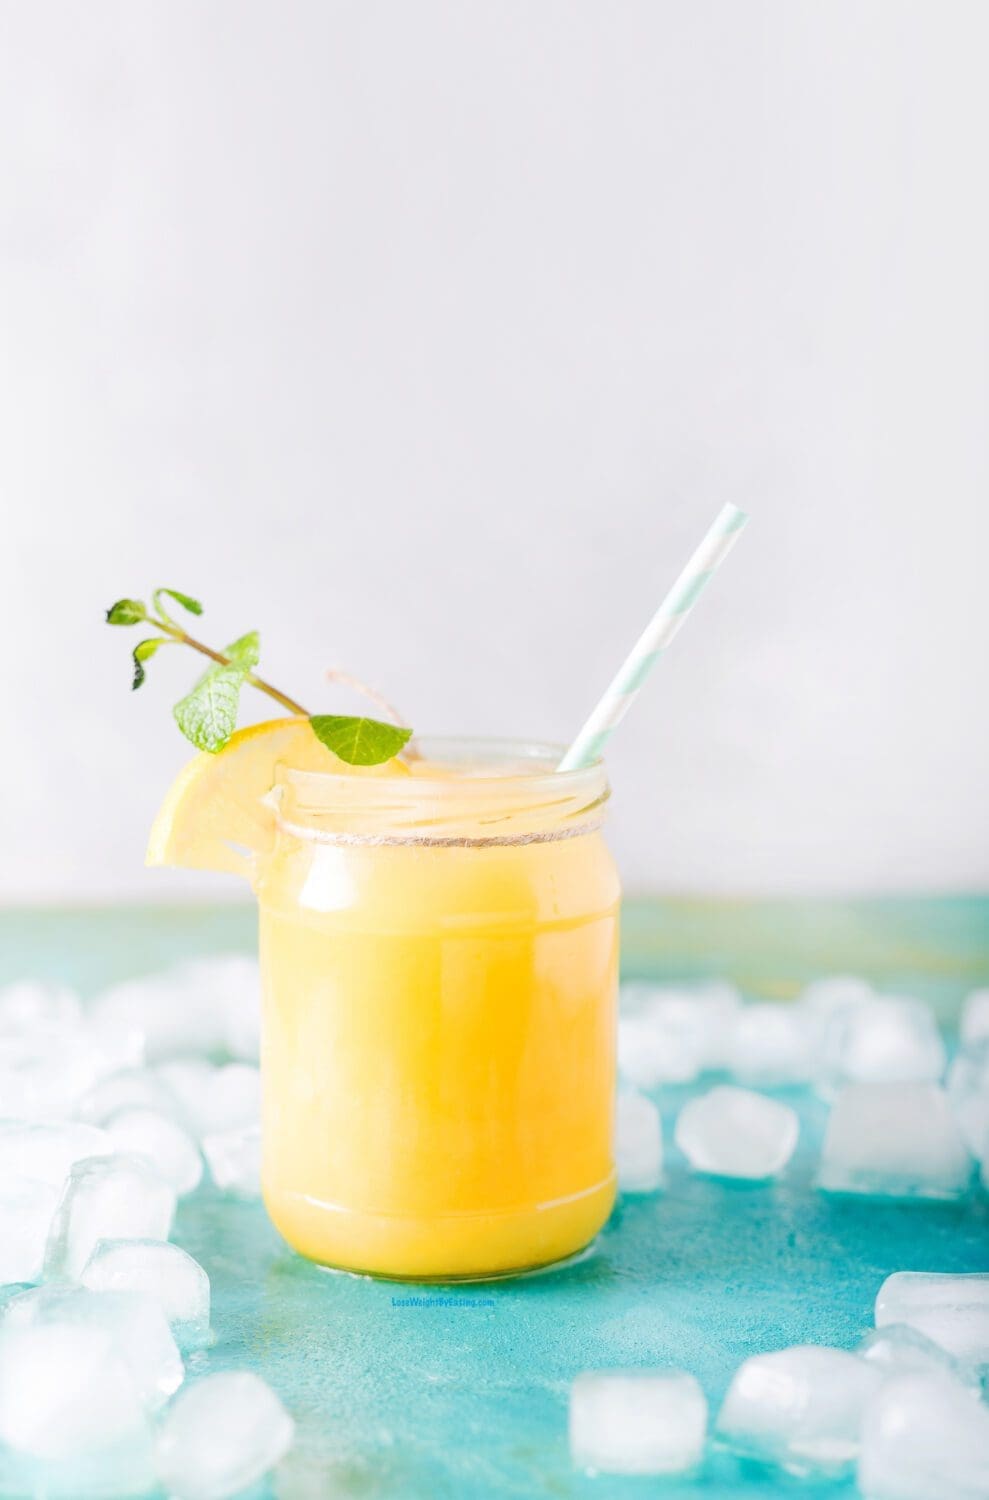 Low Calorie High Protein Lemonade Smoothie